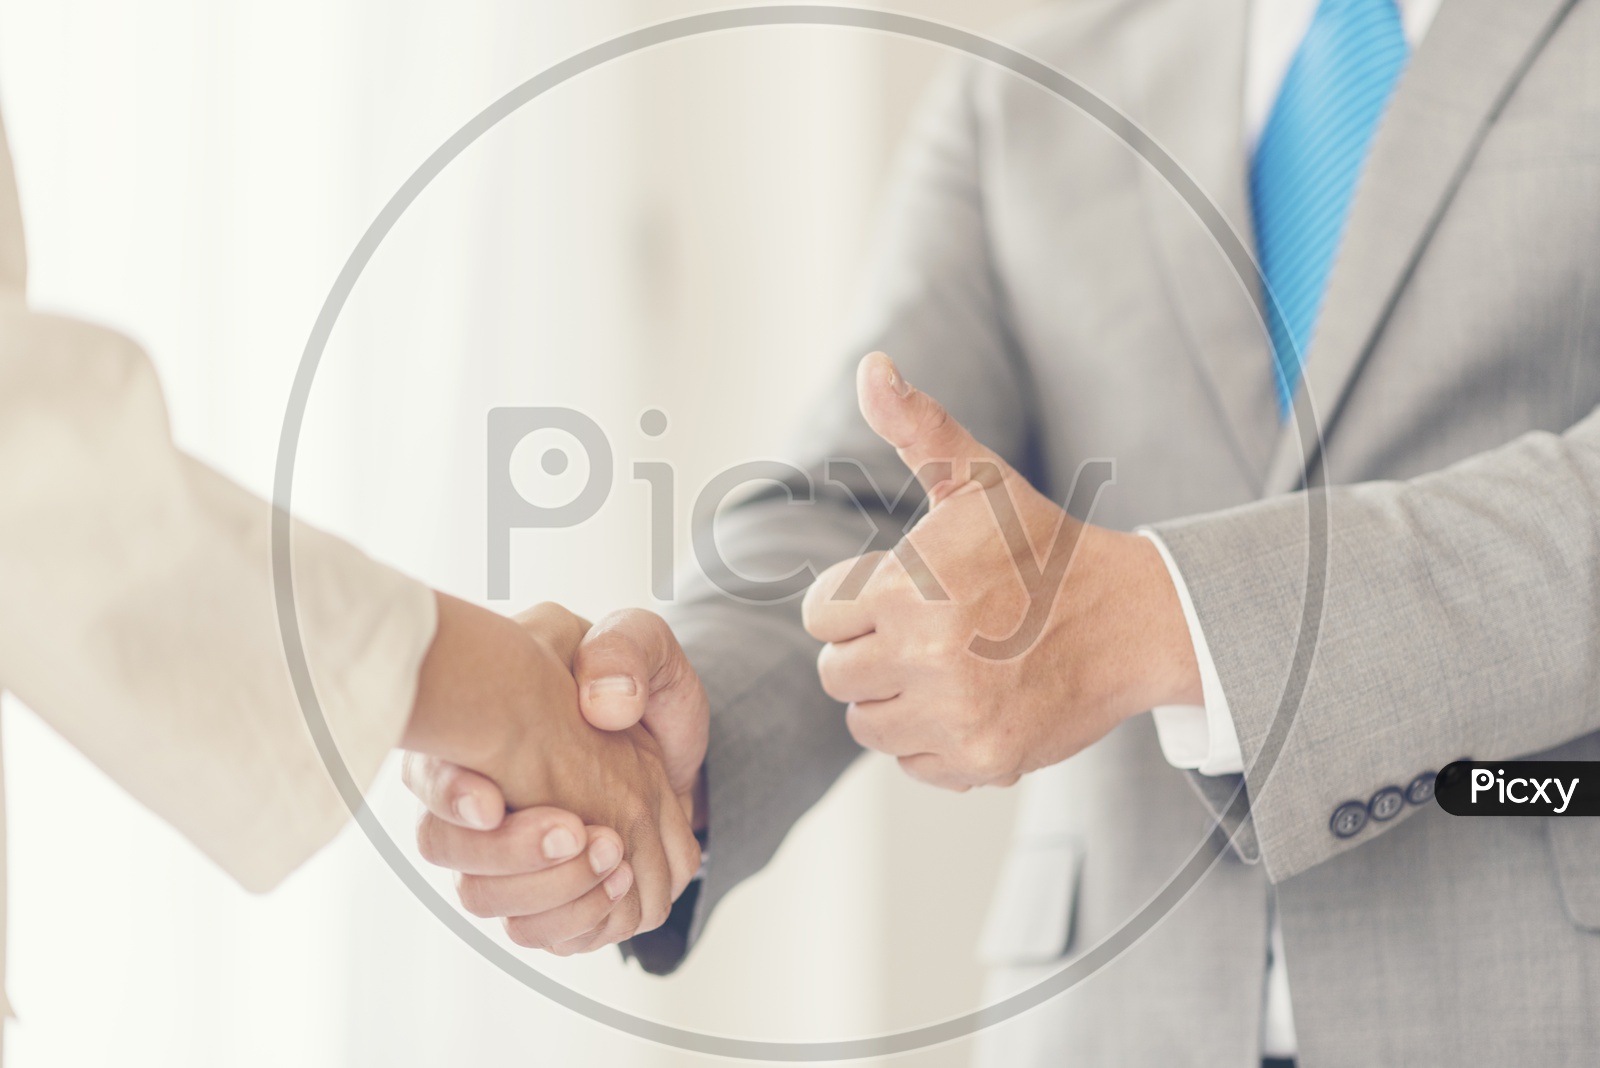 Business Success Greetings Concept With Business Partners Shaking Hands And Thump up Gesture Closeup